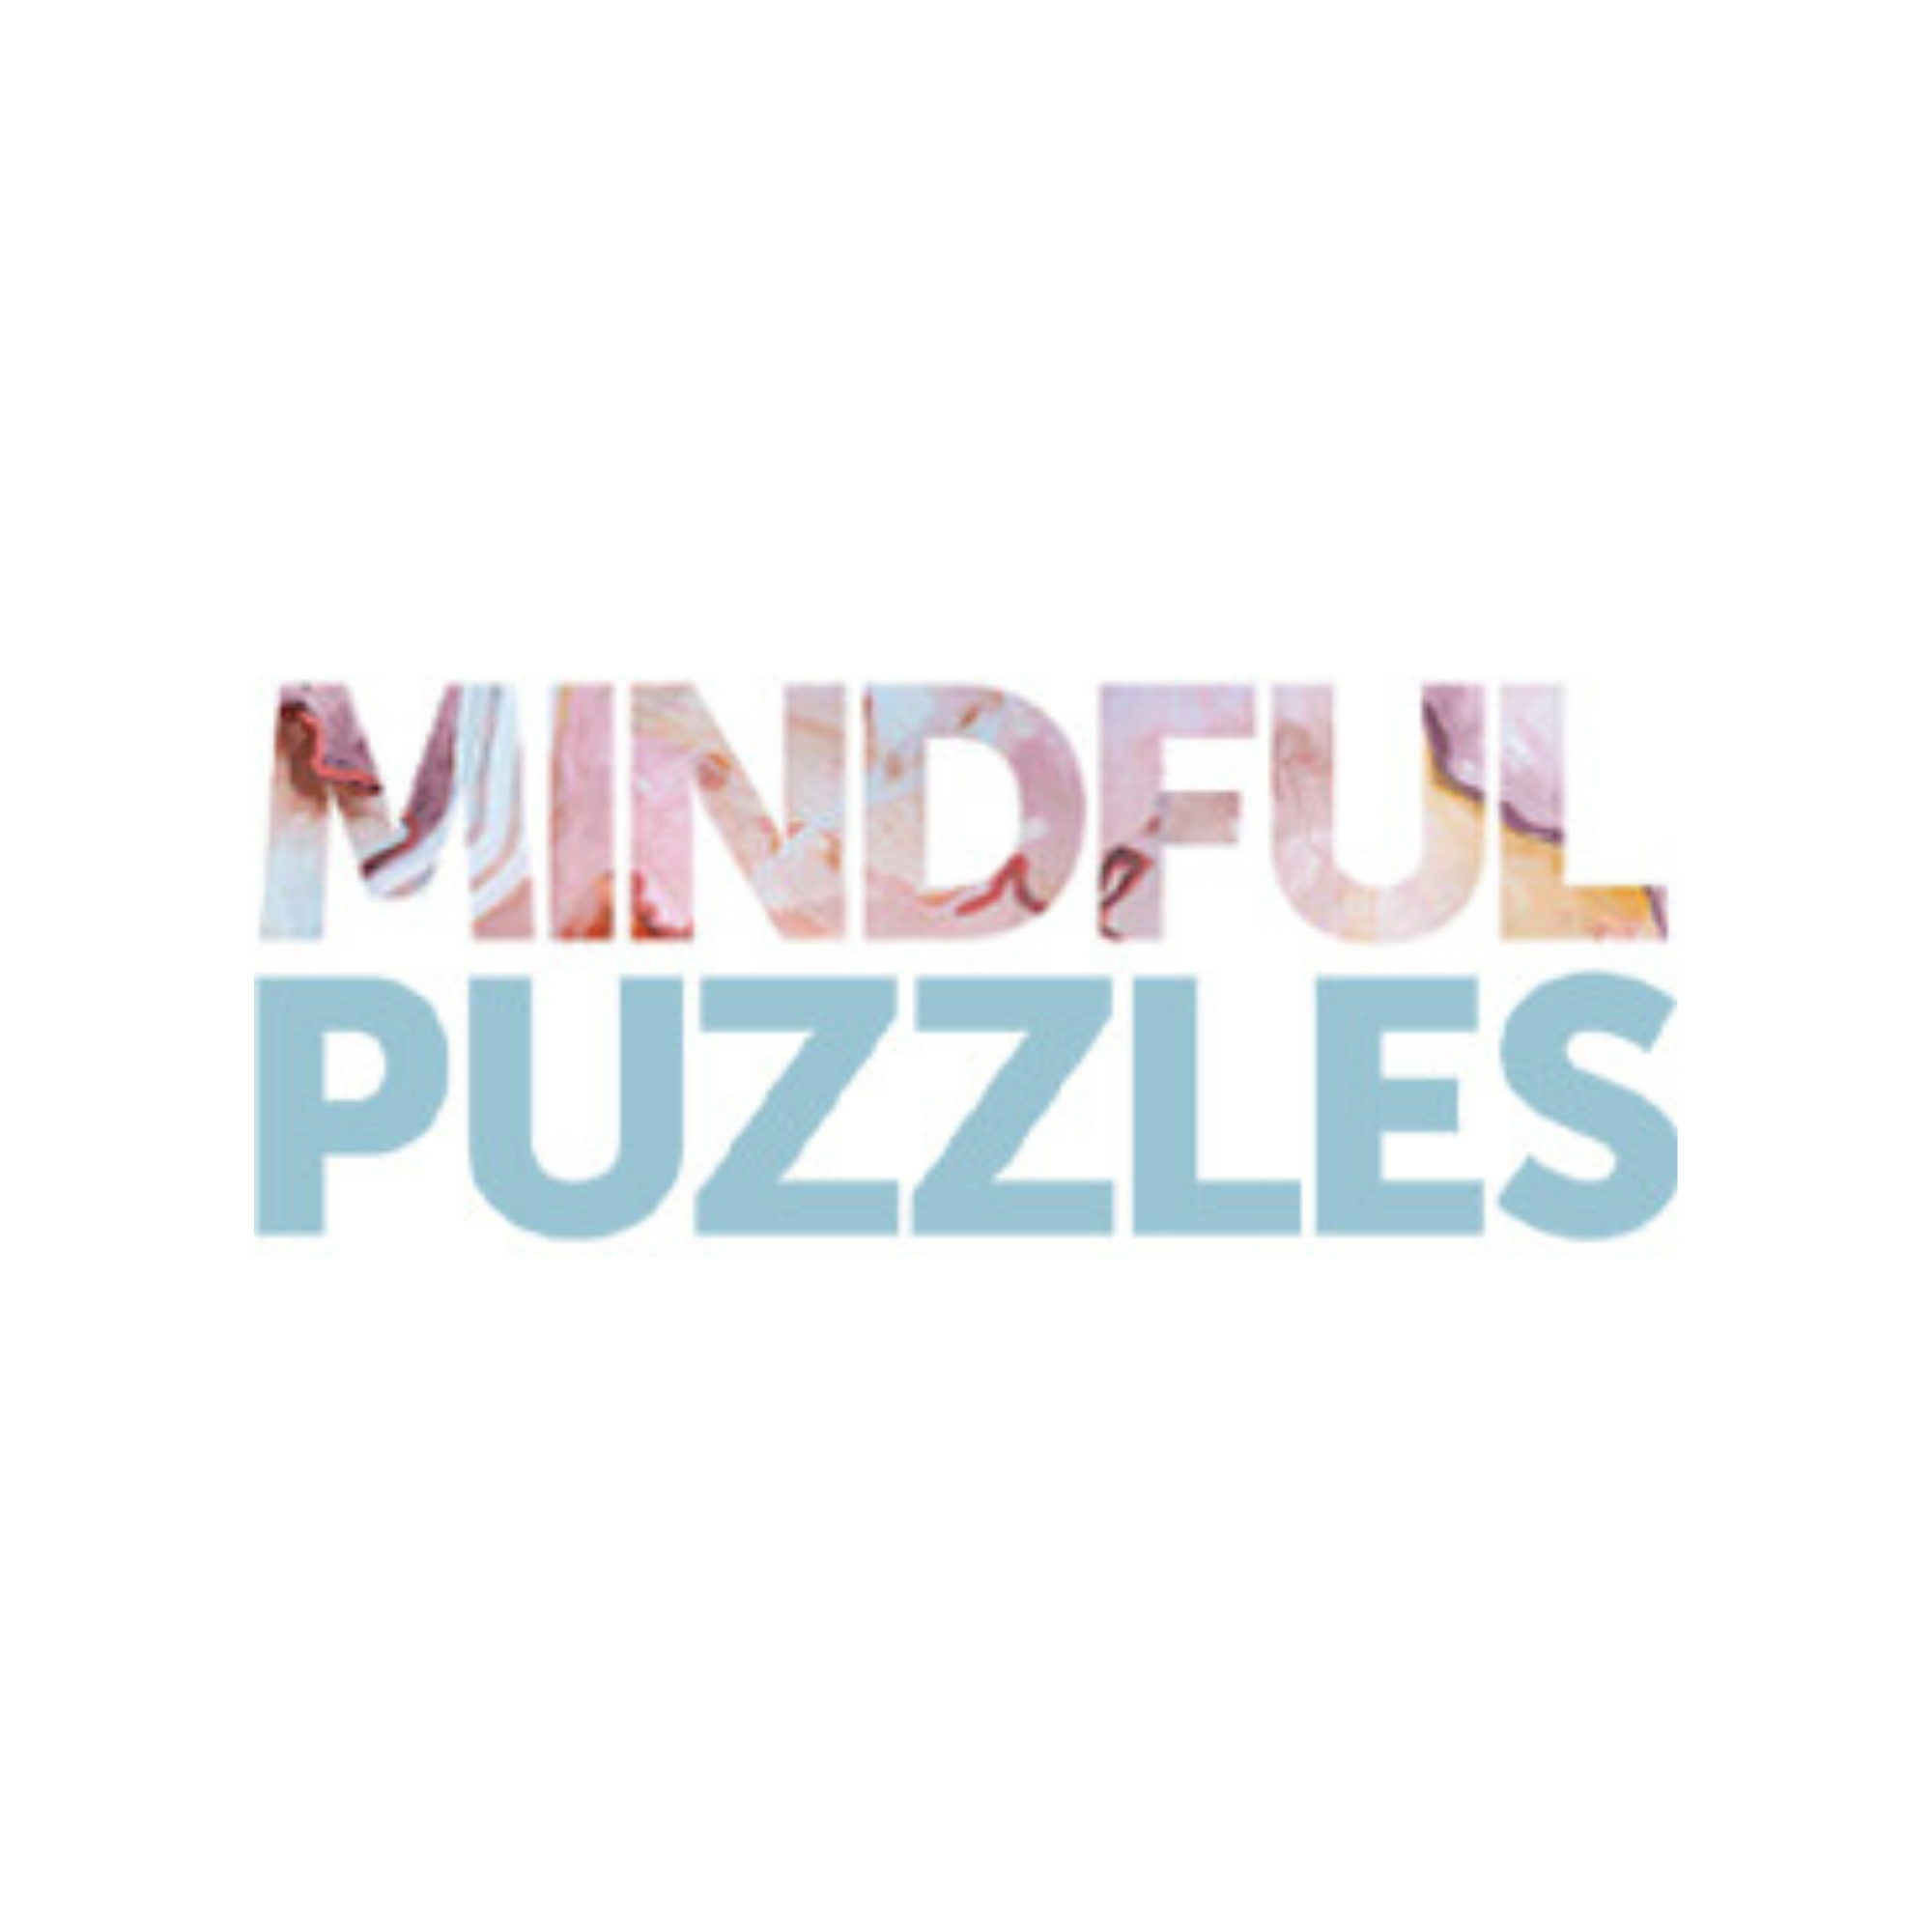 MINDFUL PUZZLES.png